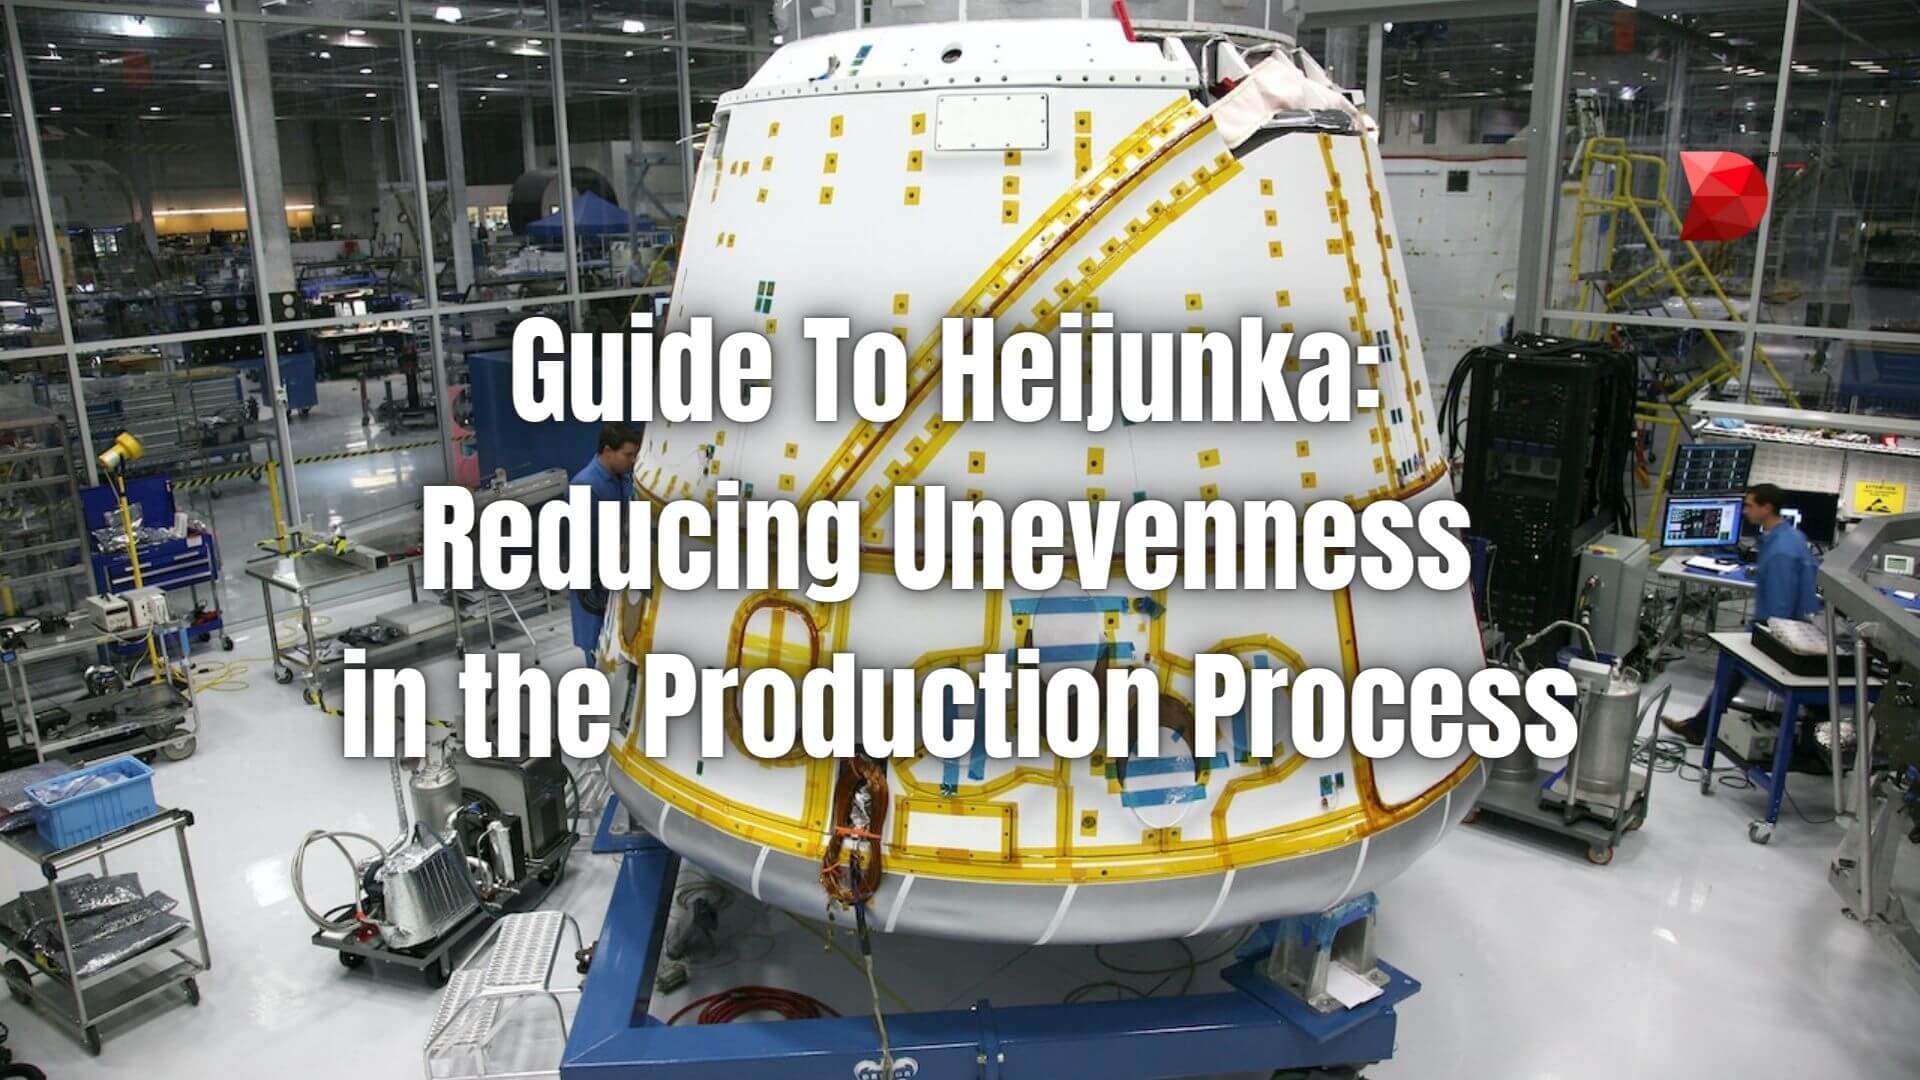 Guide To Heijunka Reducing Unevenness in the Production Process